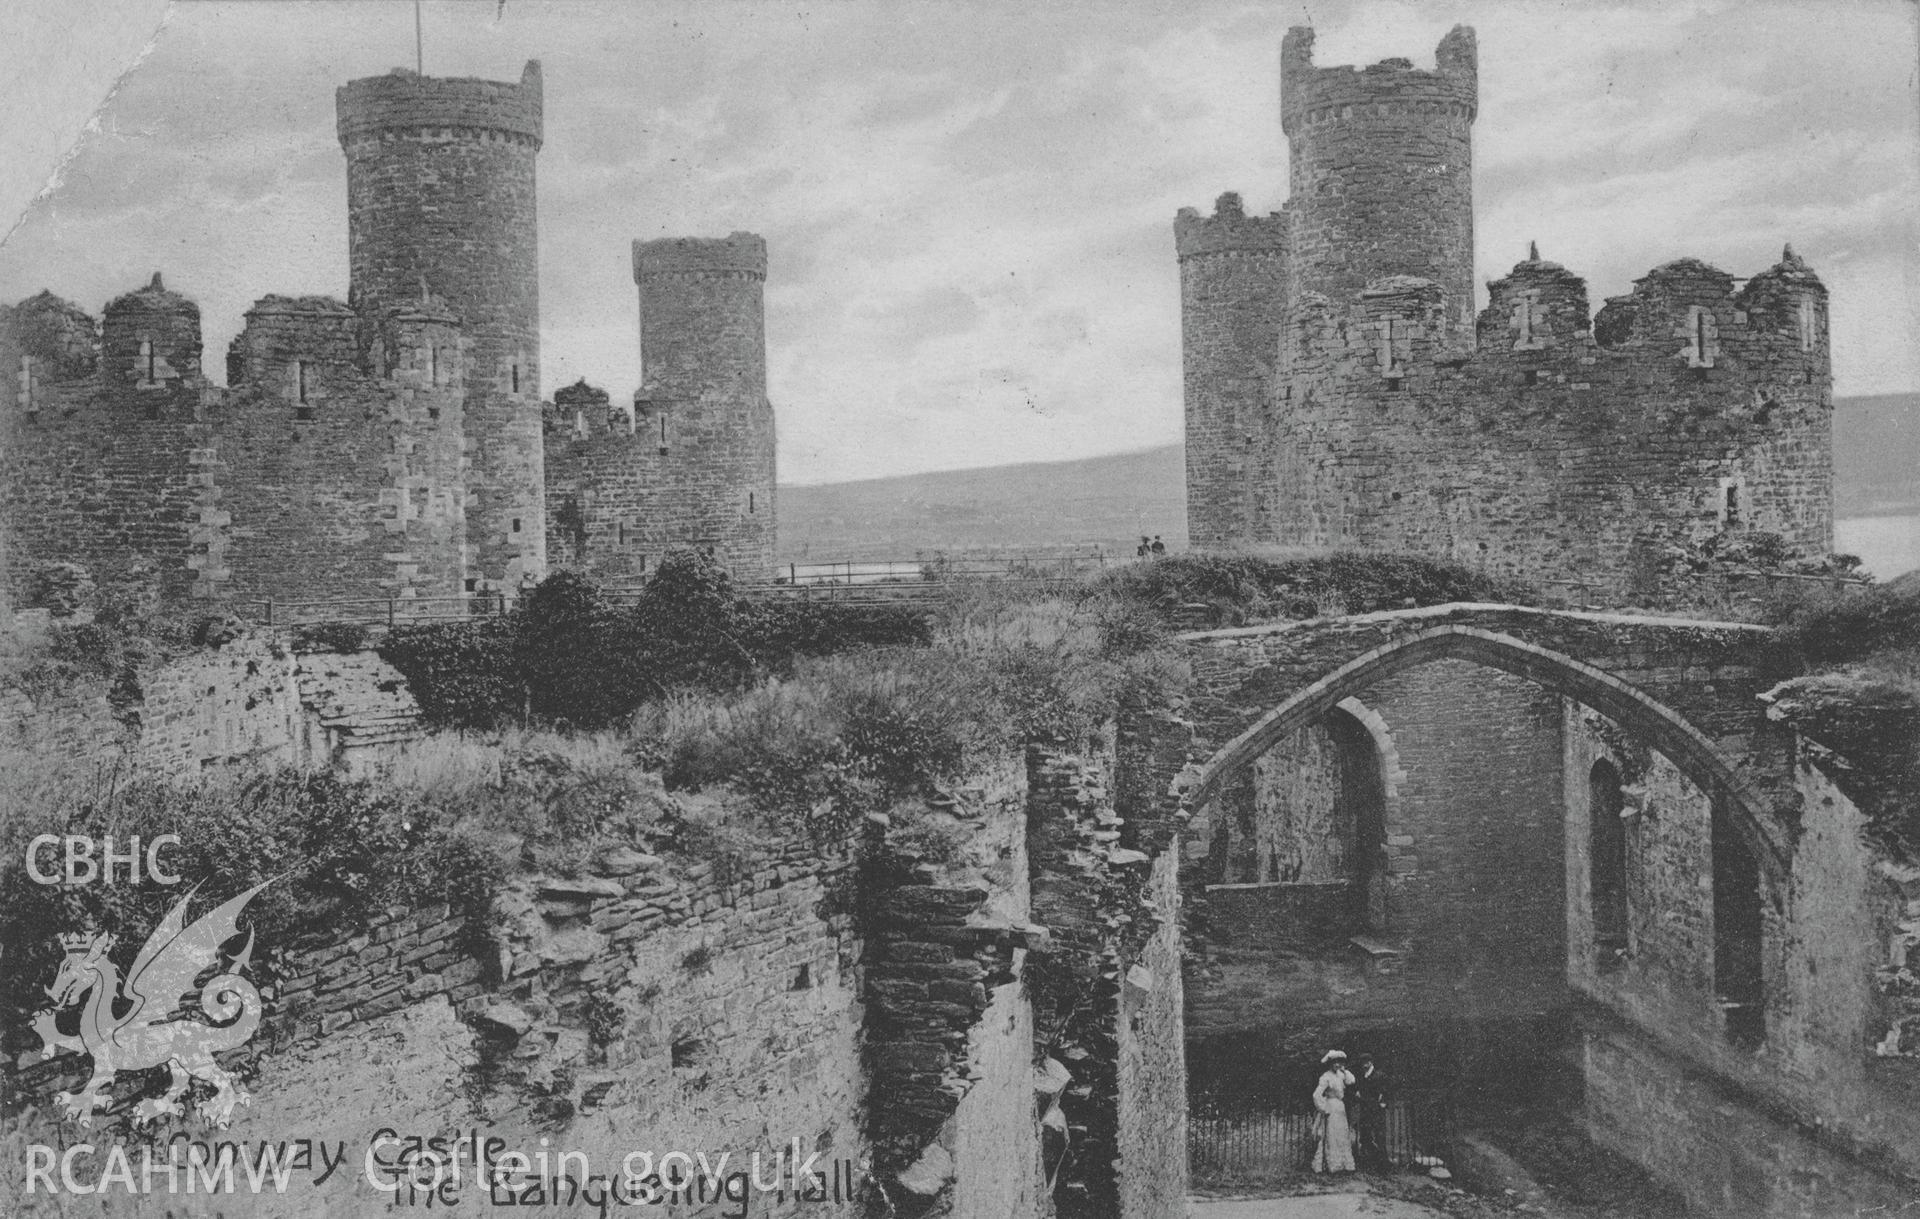 Digital copy of an albumen print showing an early view of the Banqueting Hall at Conway Castle.